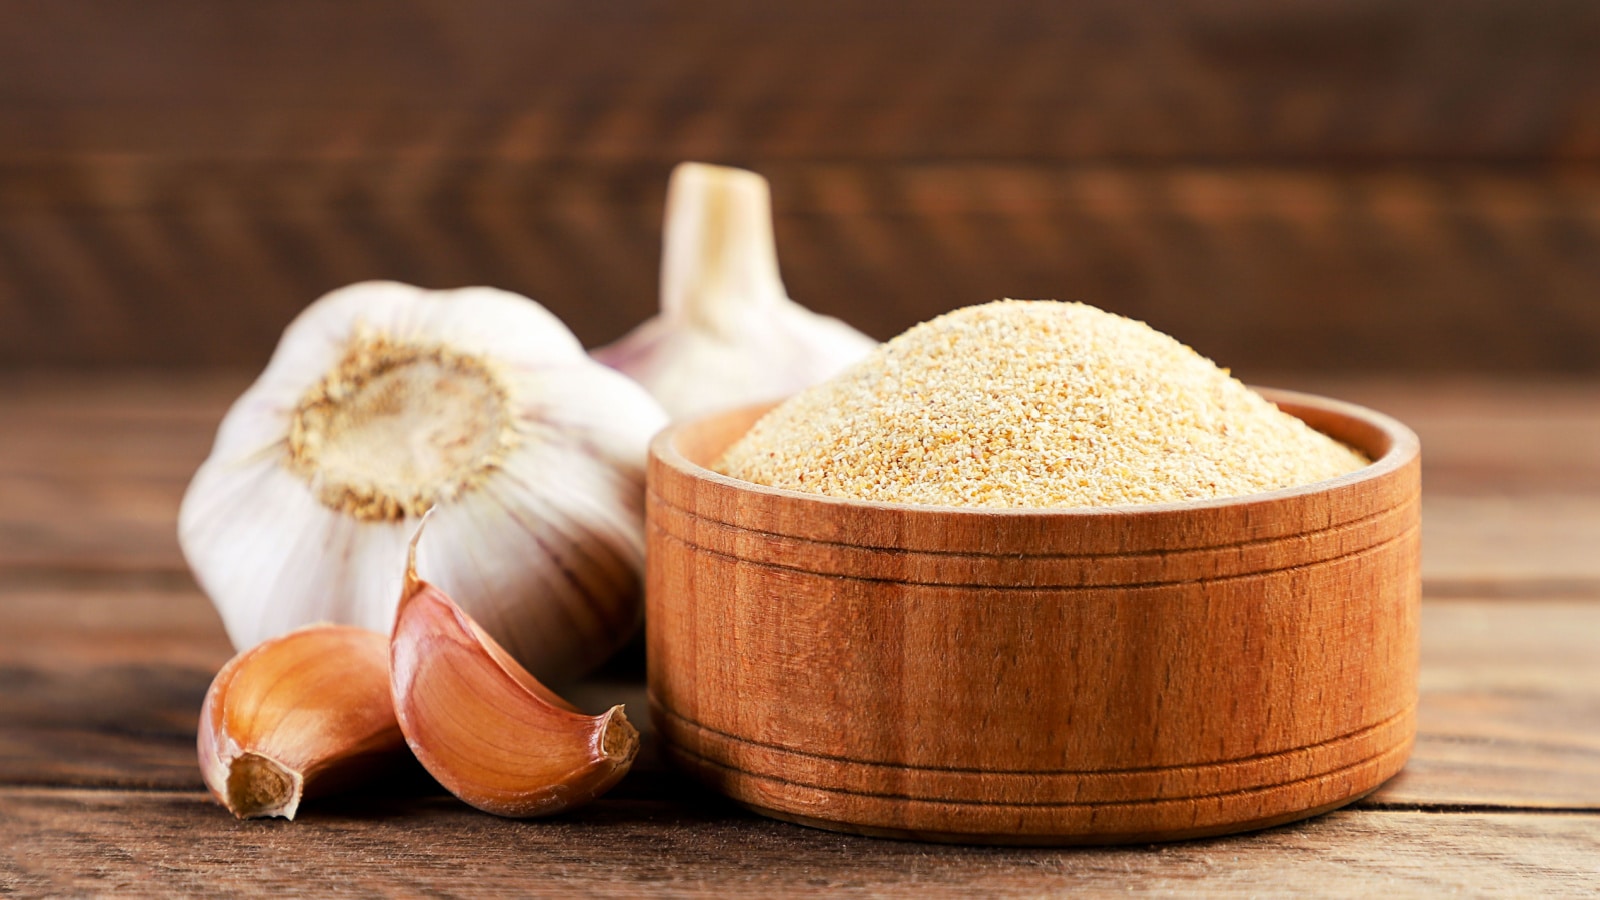 Ground garlic in a plate and cloves on a wooden background